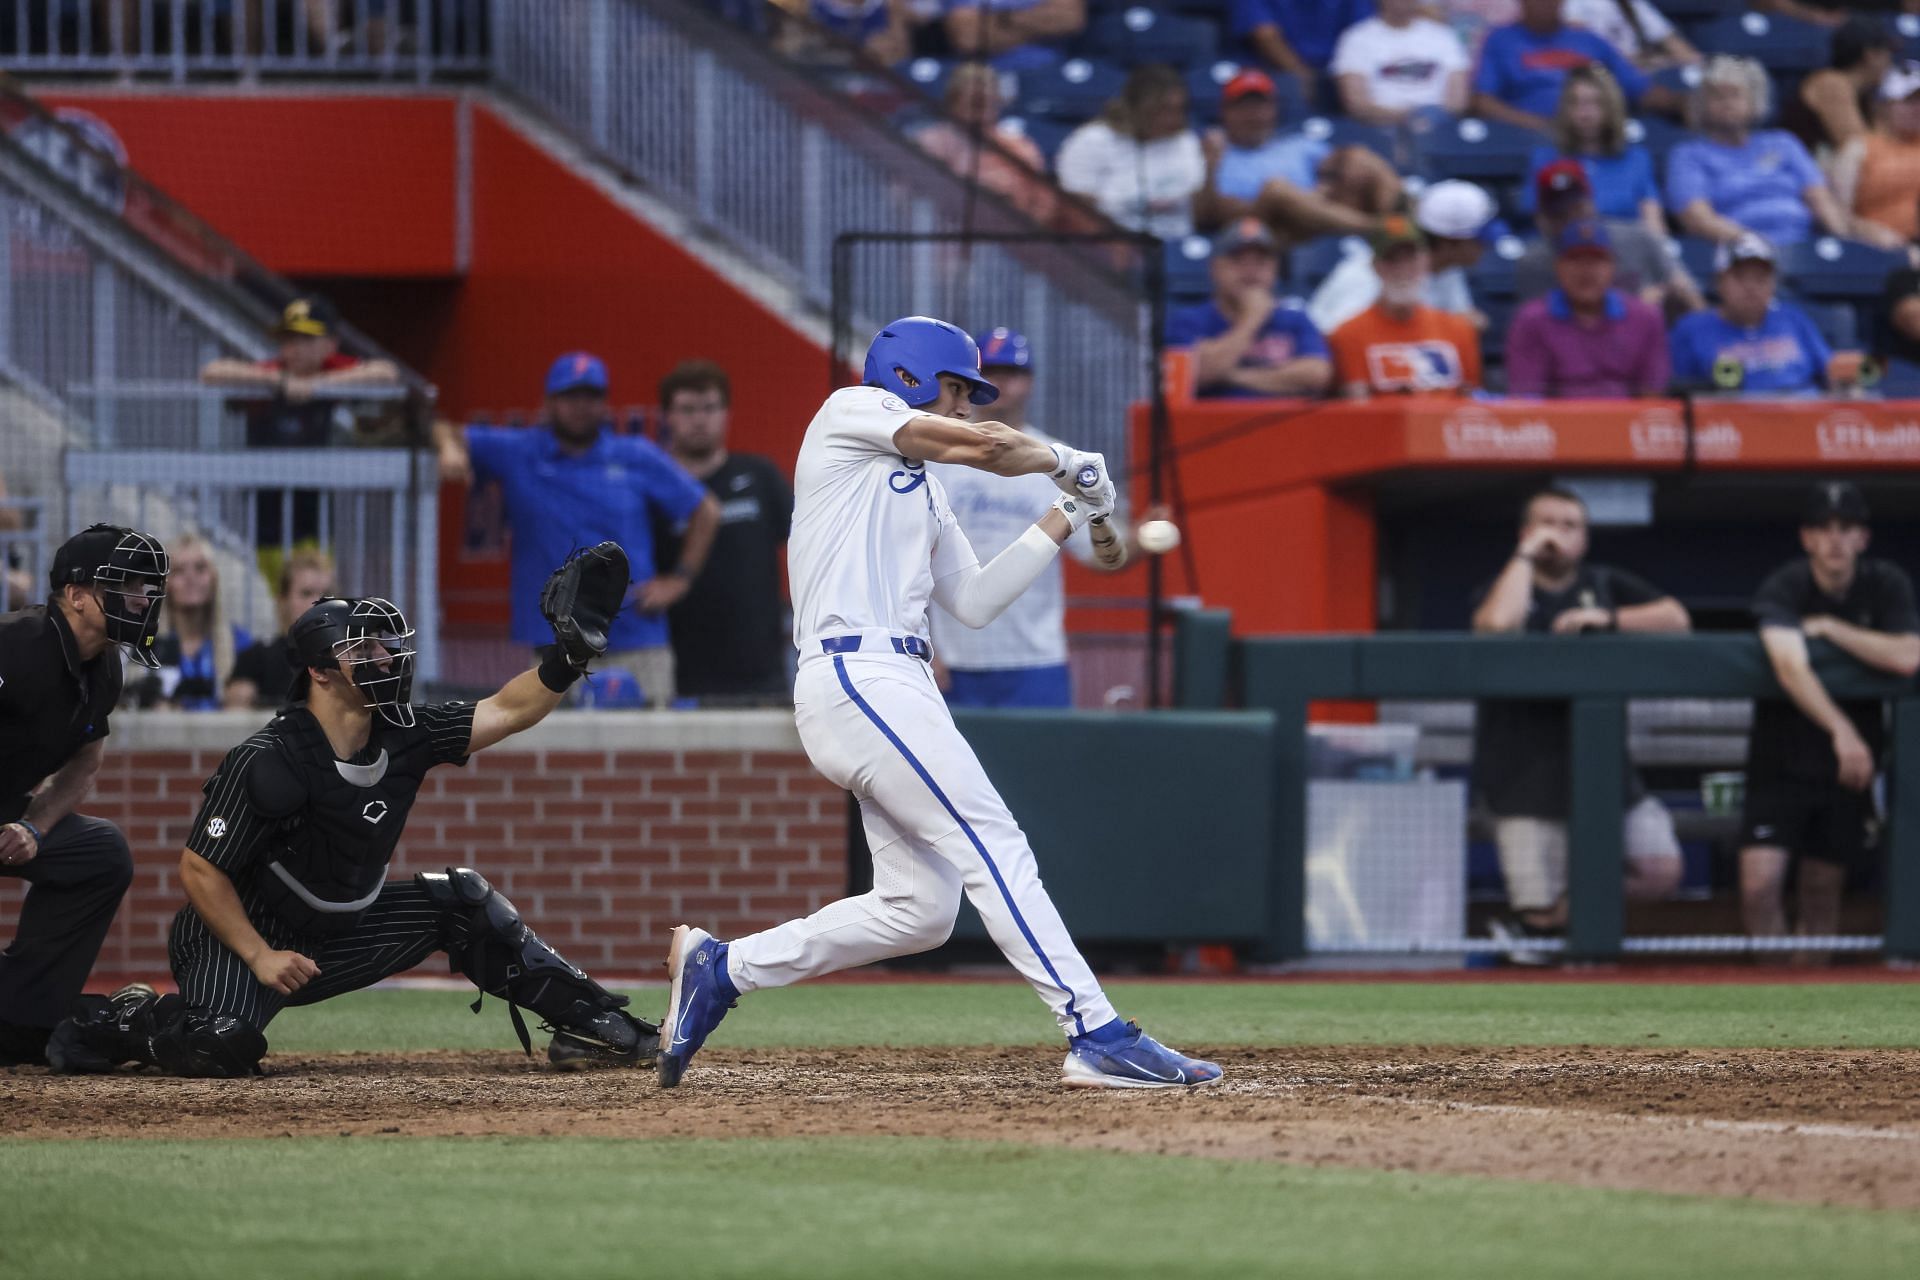 Ridaught: Gators one win from CWS title series